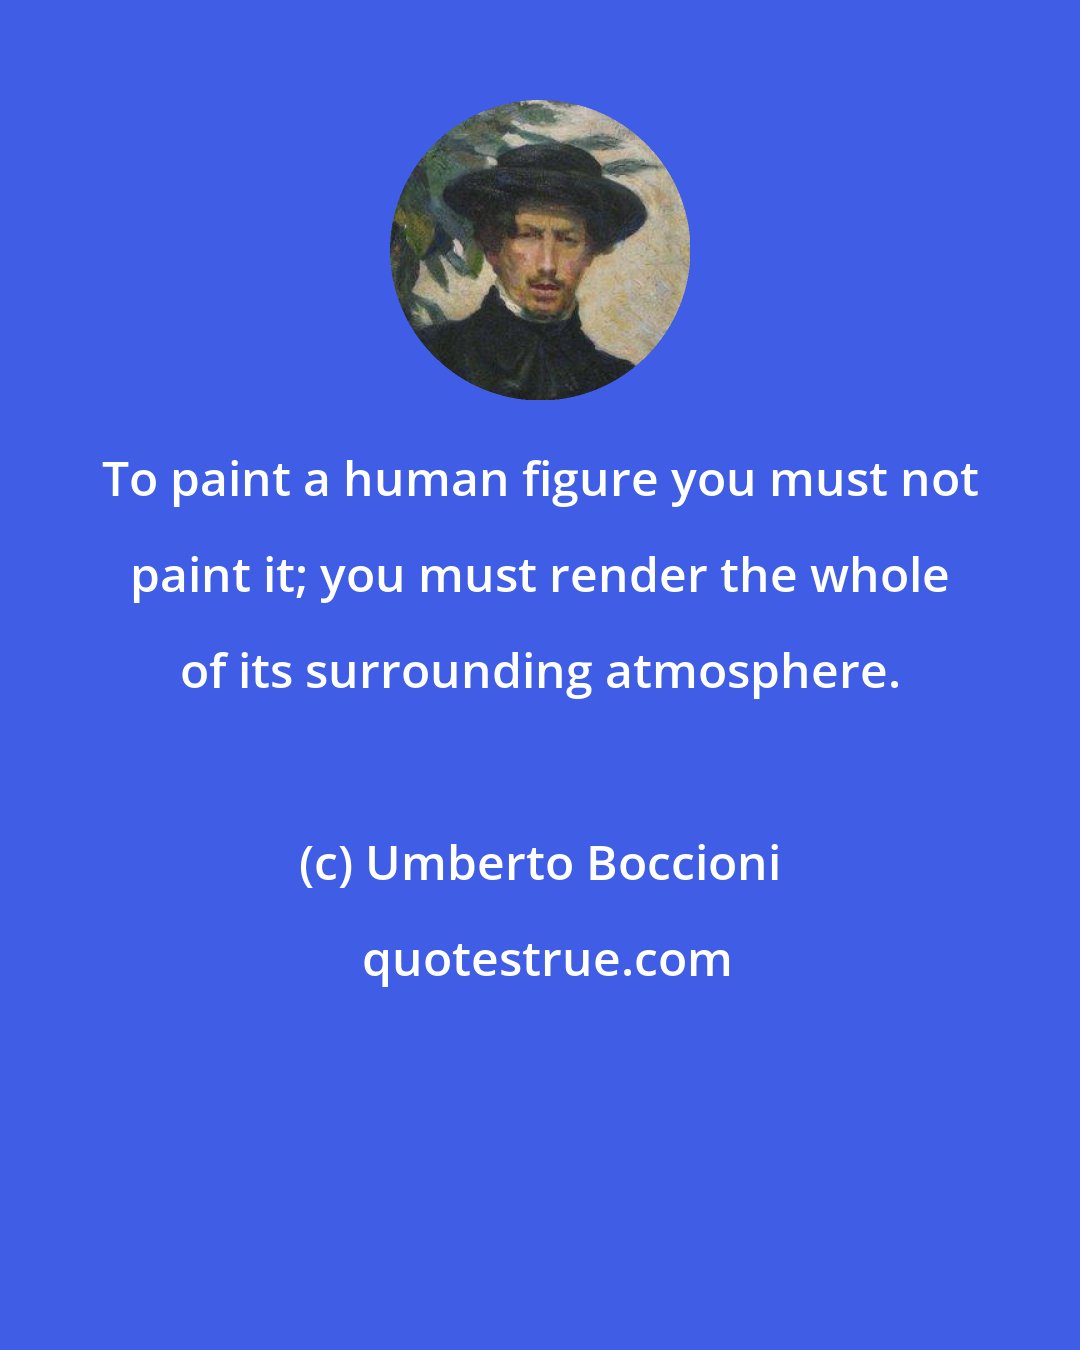 Umberto Boccioni: To paint a human figure you must not paint it; you must render the whole of its surrounding atmosphere.